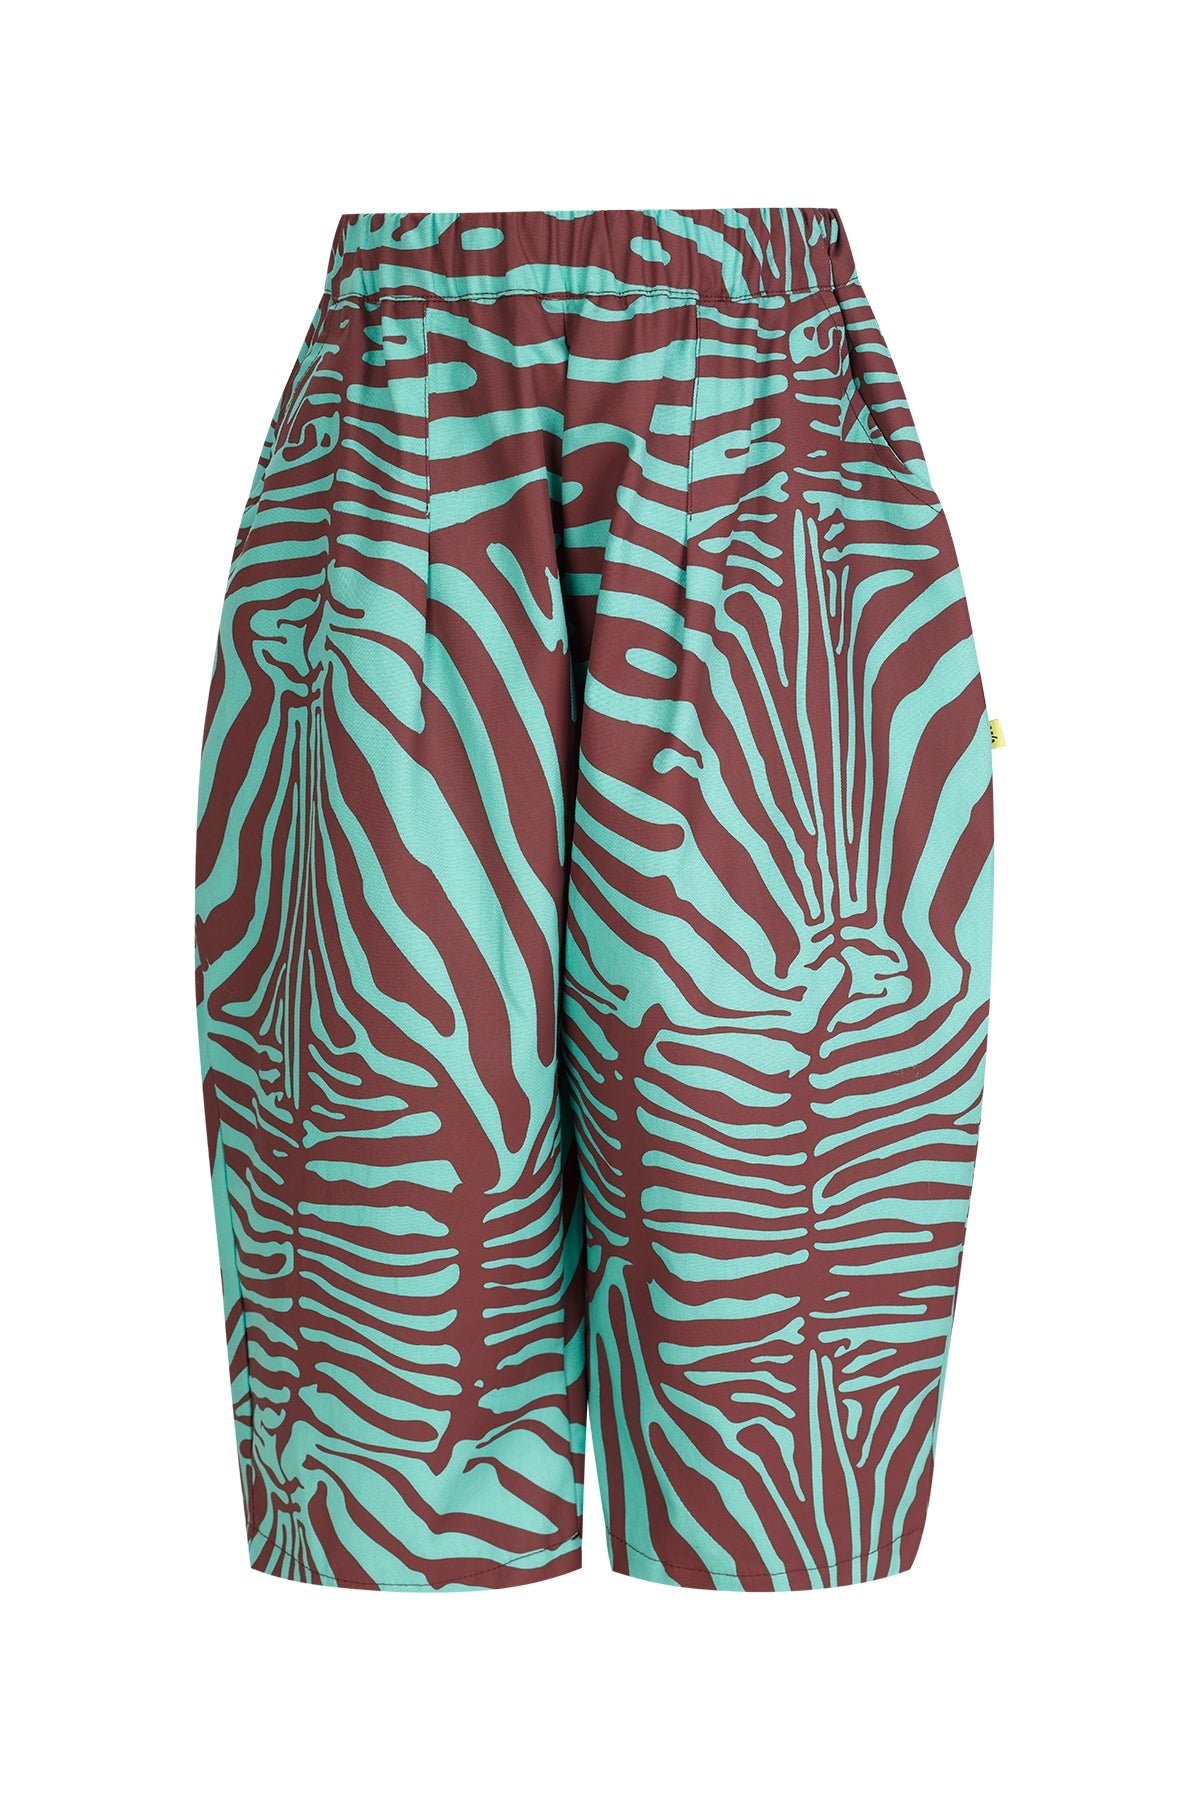 MINT AND BURGUNDY PRINTED LOOSE TROUSERS MA KIDS